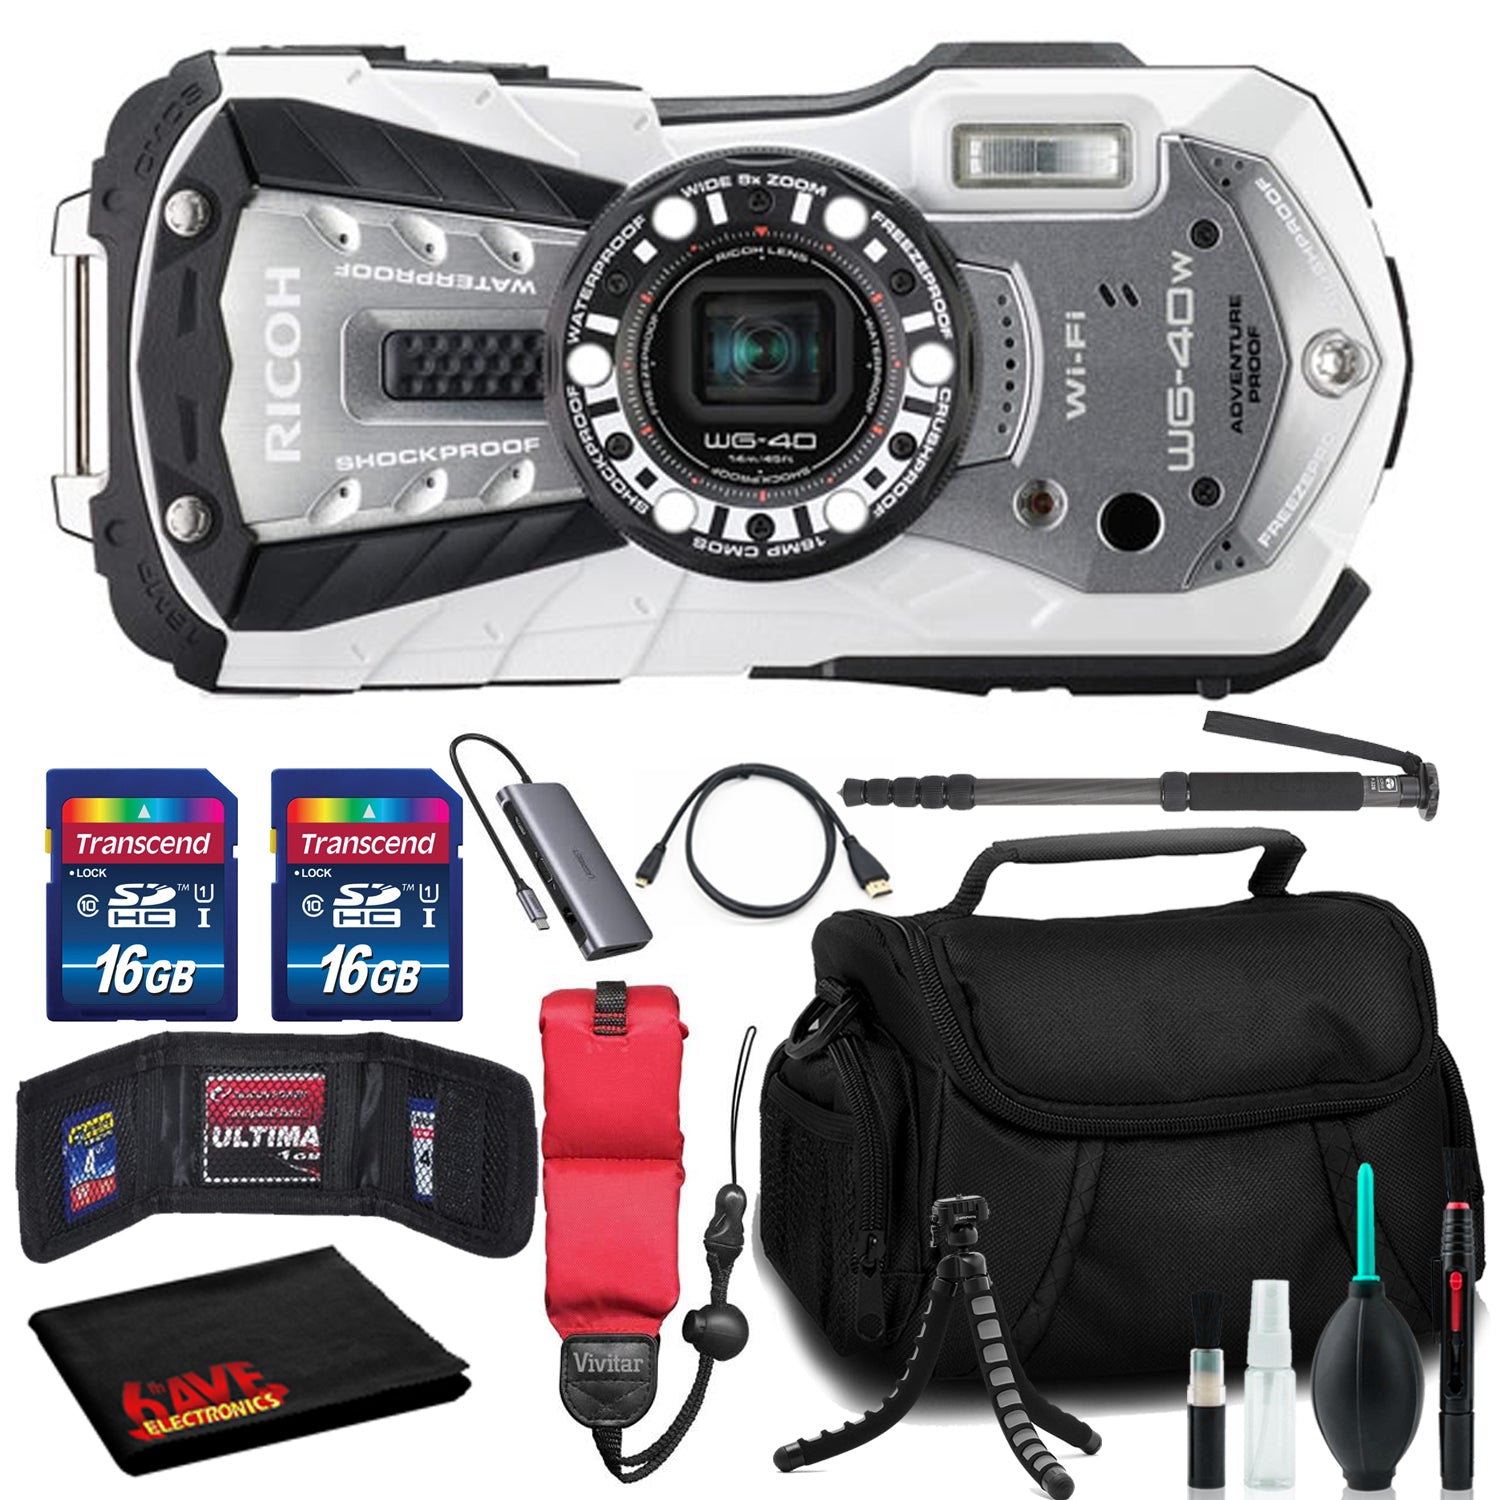 RICOH WG-40W Waterproof Digital Camera with Memory Kit, Float, Tripod, and More